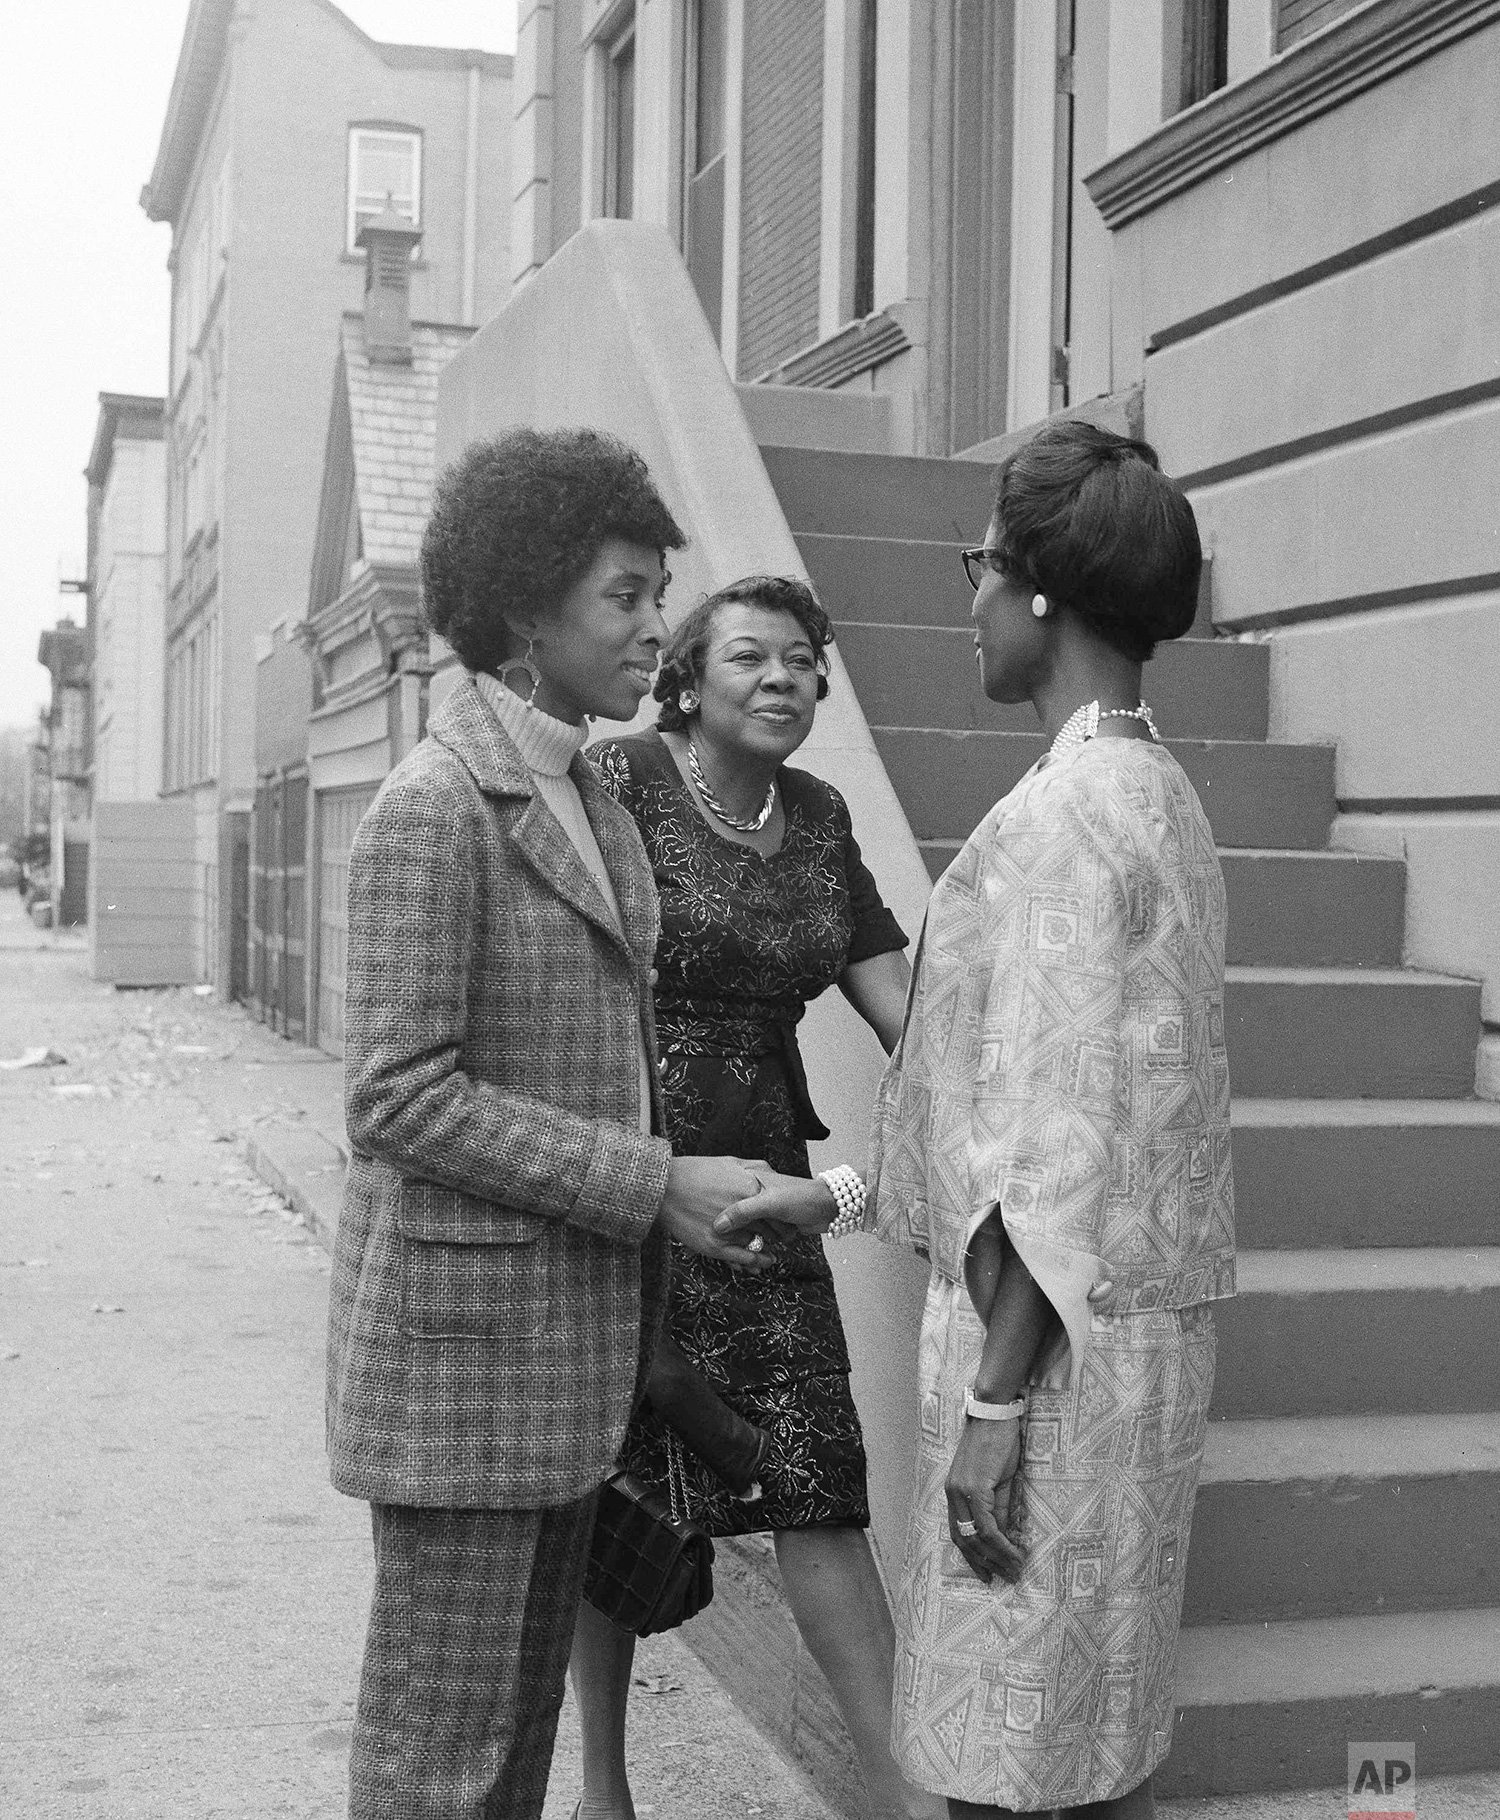  Mrs. Shirley Chisholm of 1165 Sterling Place in Brooklyn,  the first Black Congresswoman in Washington.   Shown in a photo on Nov. 6, 1968, while talking on the street to  Mrs. Elsa Bennet, left, Mrs. Sallie Owens  (AP Photo) 